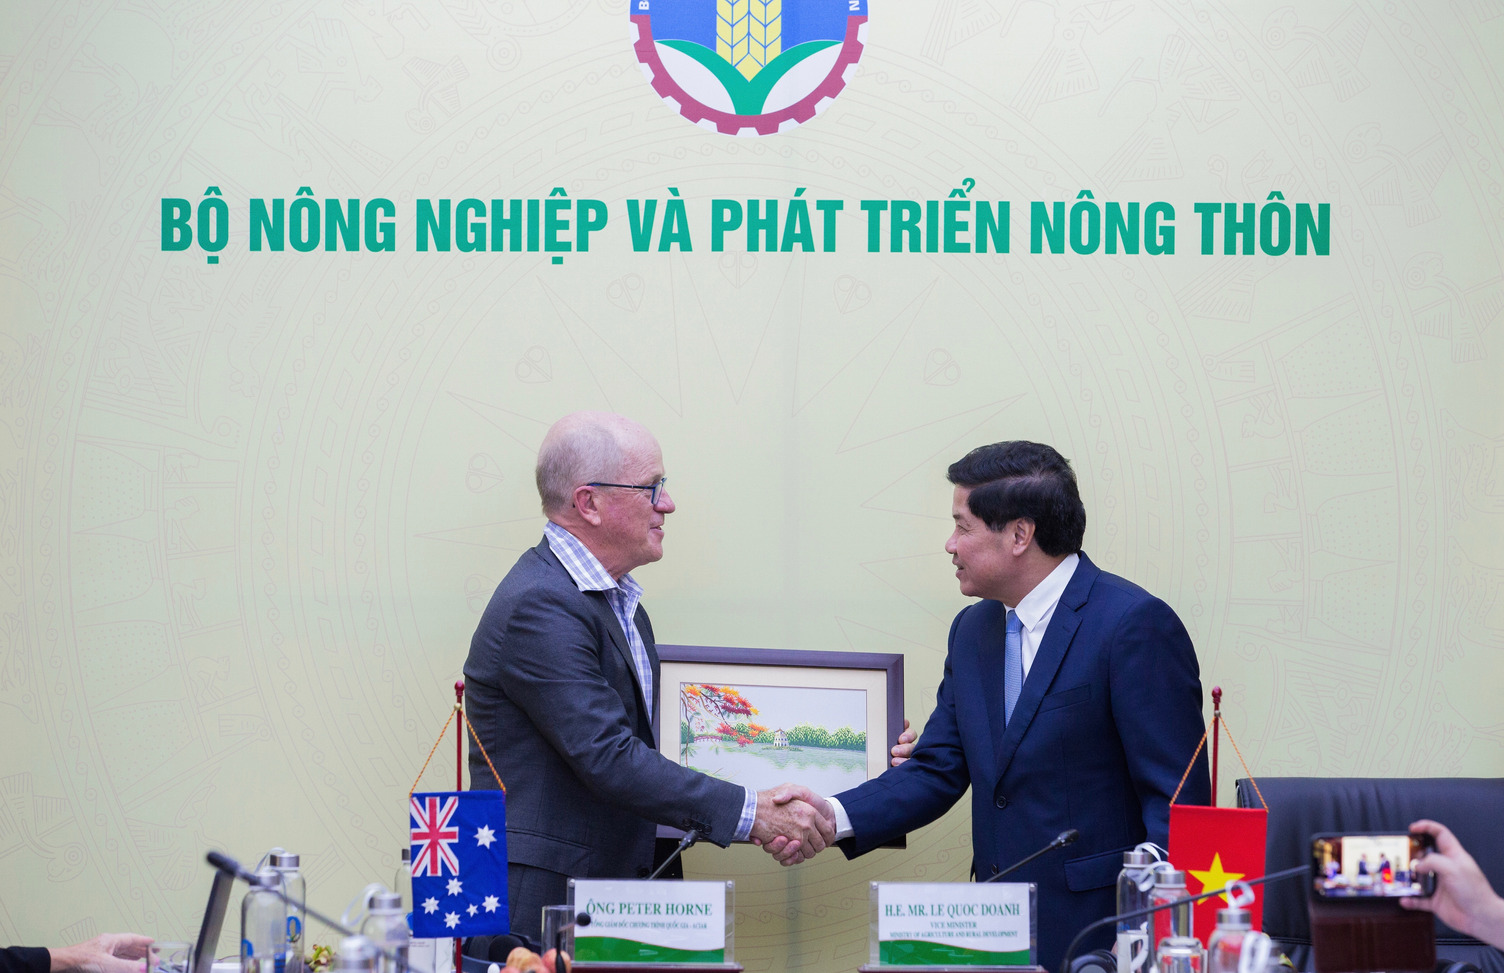 The mid-term review of ACIAR-Vietnam research collaboration strategy was co-chaired by Dr Peter Horne, ACIAR’s Country Partnerships General Manager and Dr Le Quoc Doanh, Vietnam’s Vice Minister of Agriculture and Rural Development. Photo: Khanh Long for ACIAR Vietnam.